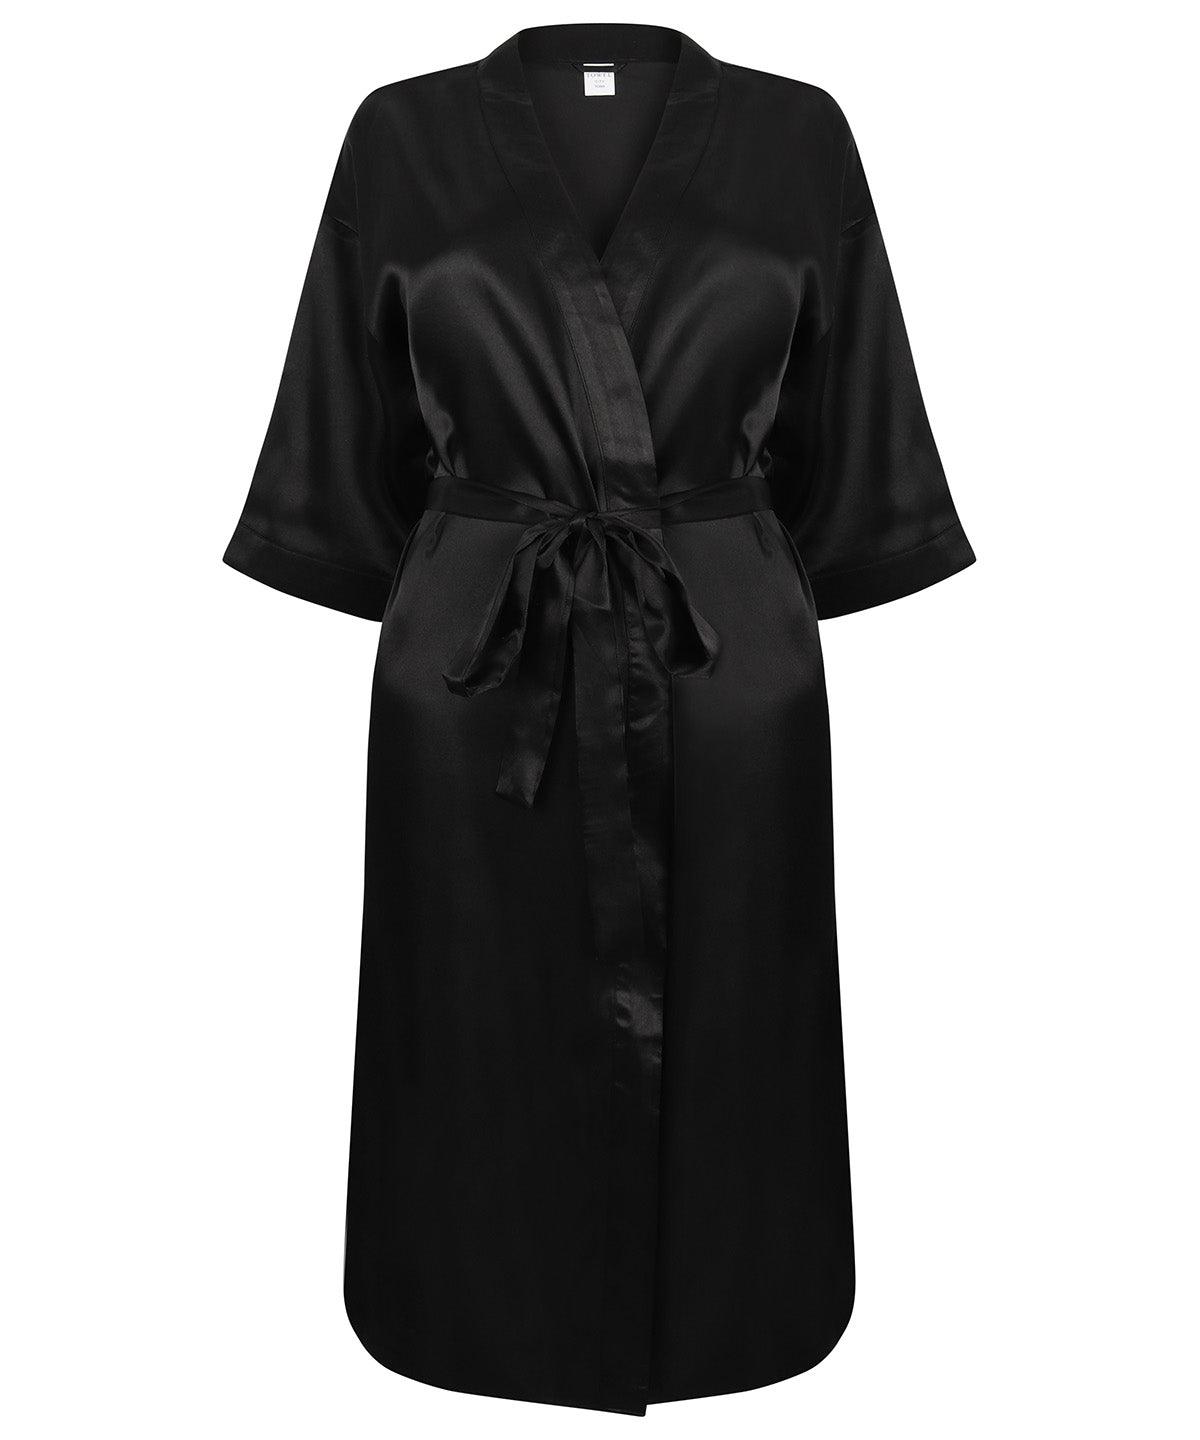 Black - Women's satin robe Robes Towel City Gifting, Gifting & Accessories, Homewares & Towelling, Lounge & Underwear, Rebrandable Schoolwear Centres